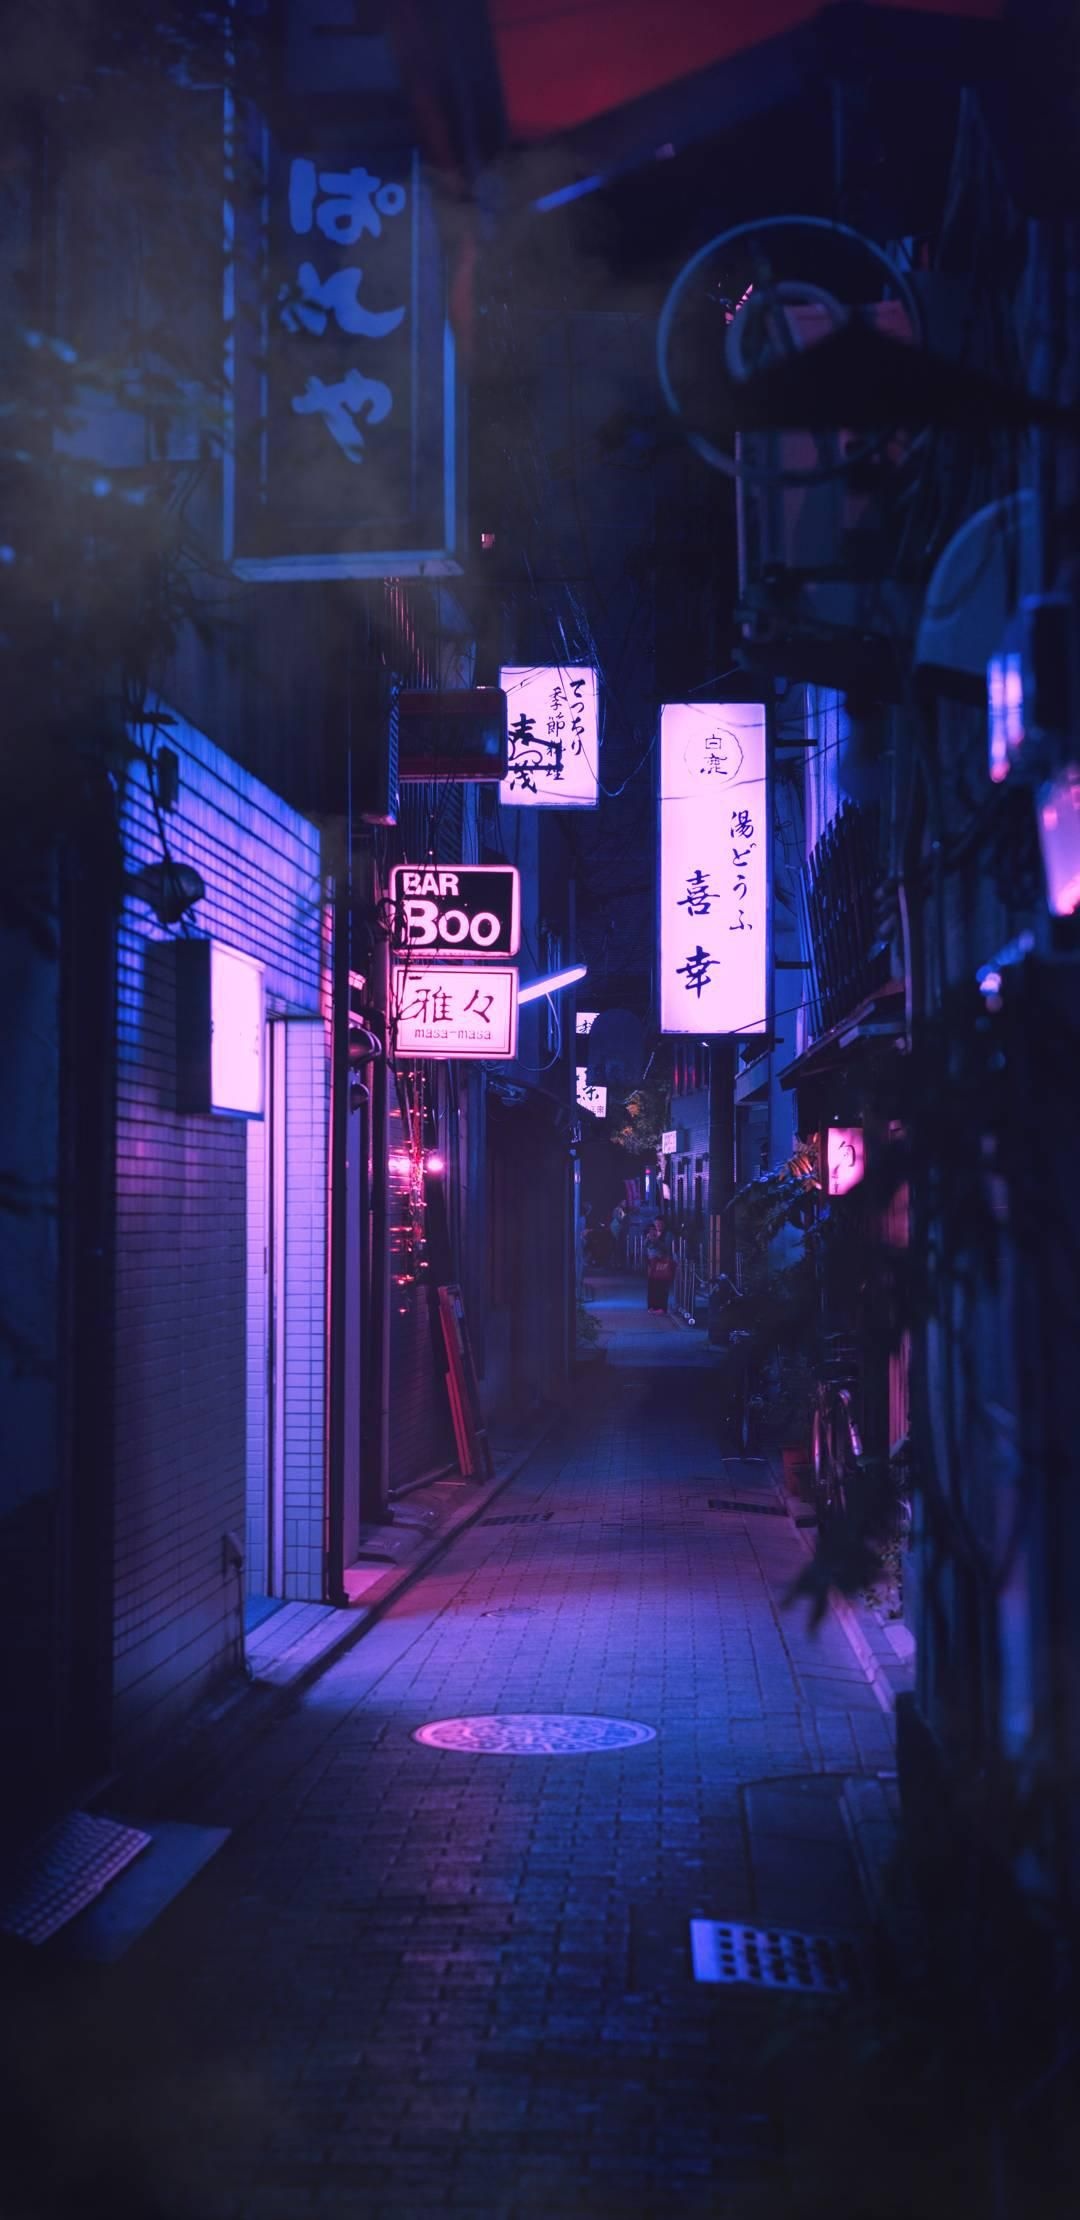 Alley: Bar Boo at the Tokyo street, Neon signboard at night, Japanese architecture, Neo Tokyo. 1080x2220 HD Background.